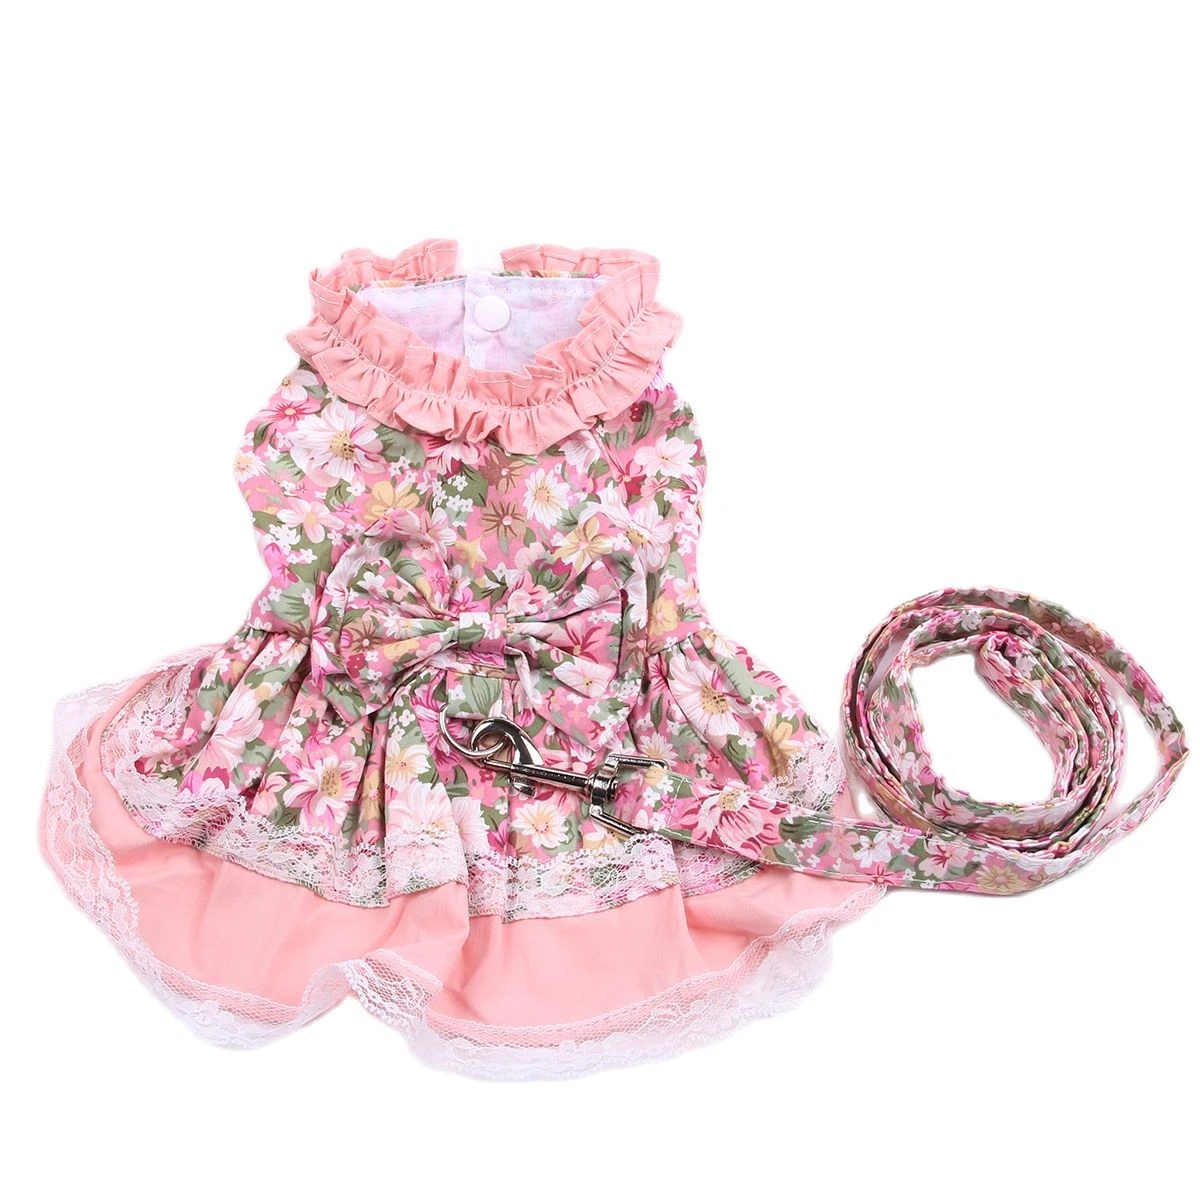 New Dog Cat Dress Shirt Floral&Bow with Matching Dog Leash Pet Puppy Skirt  Spring/Summer clothes apparel 5 sizes 2 Colours